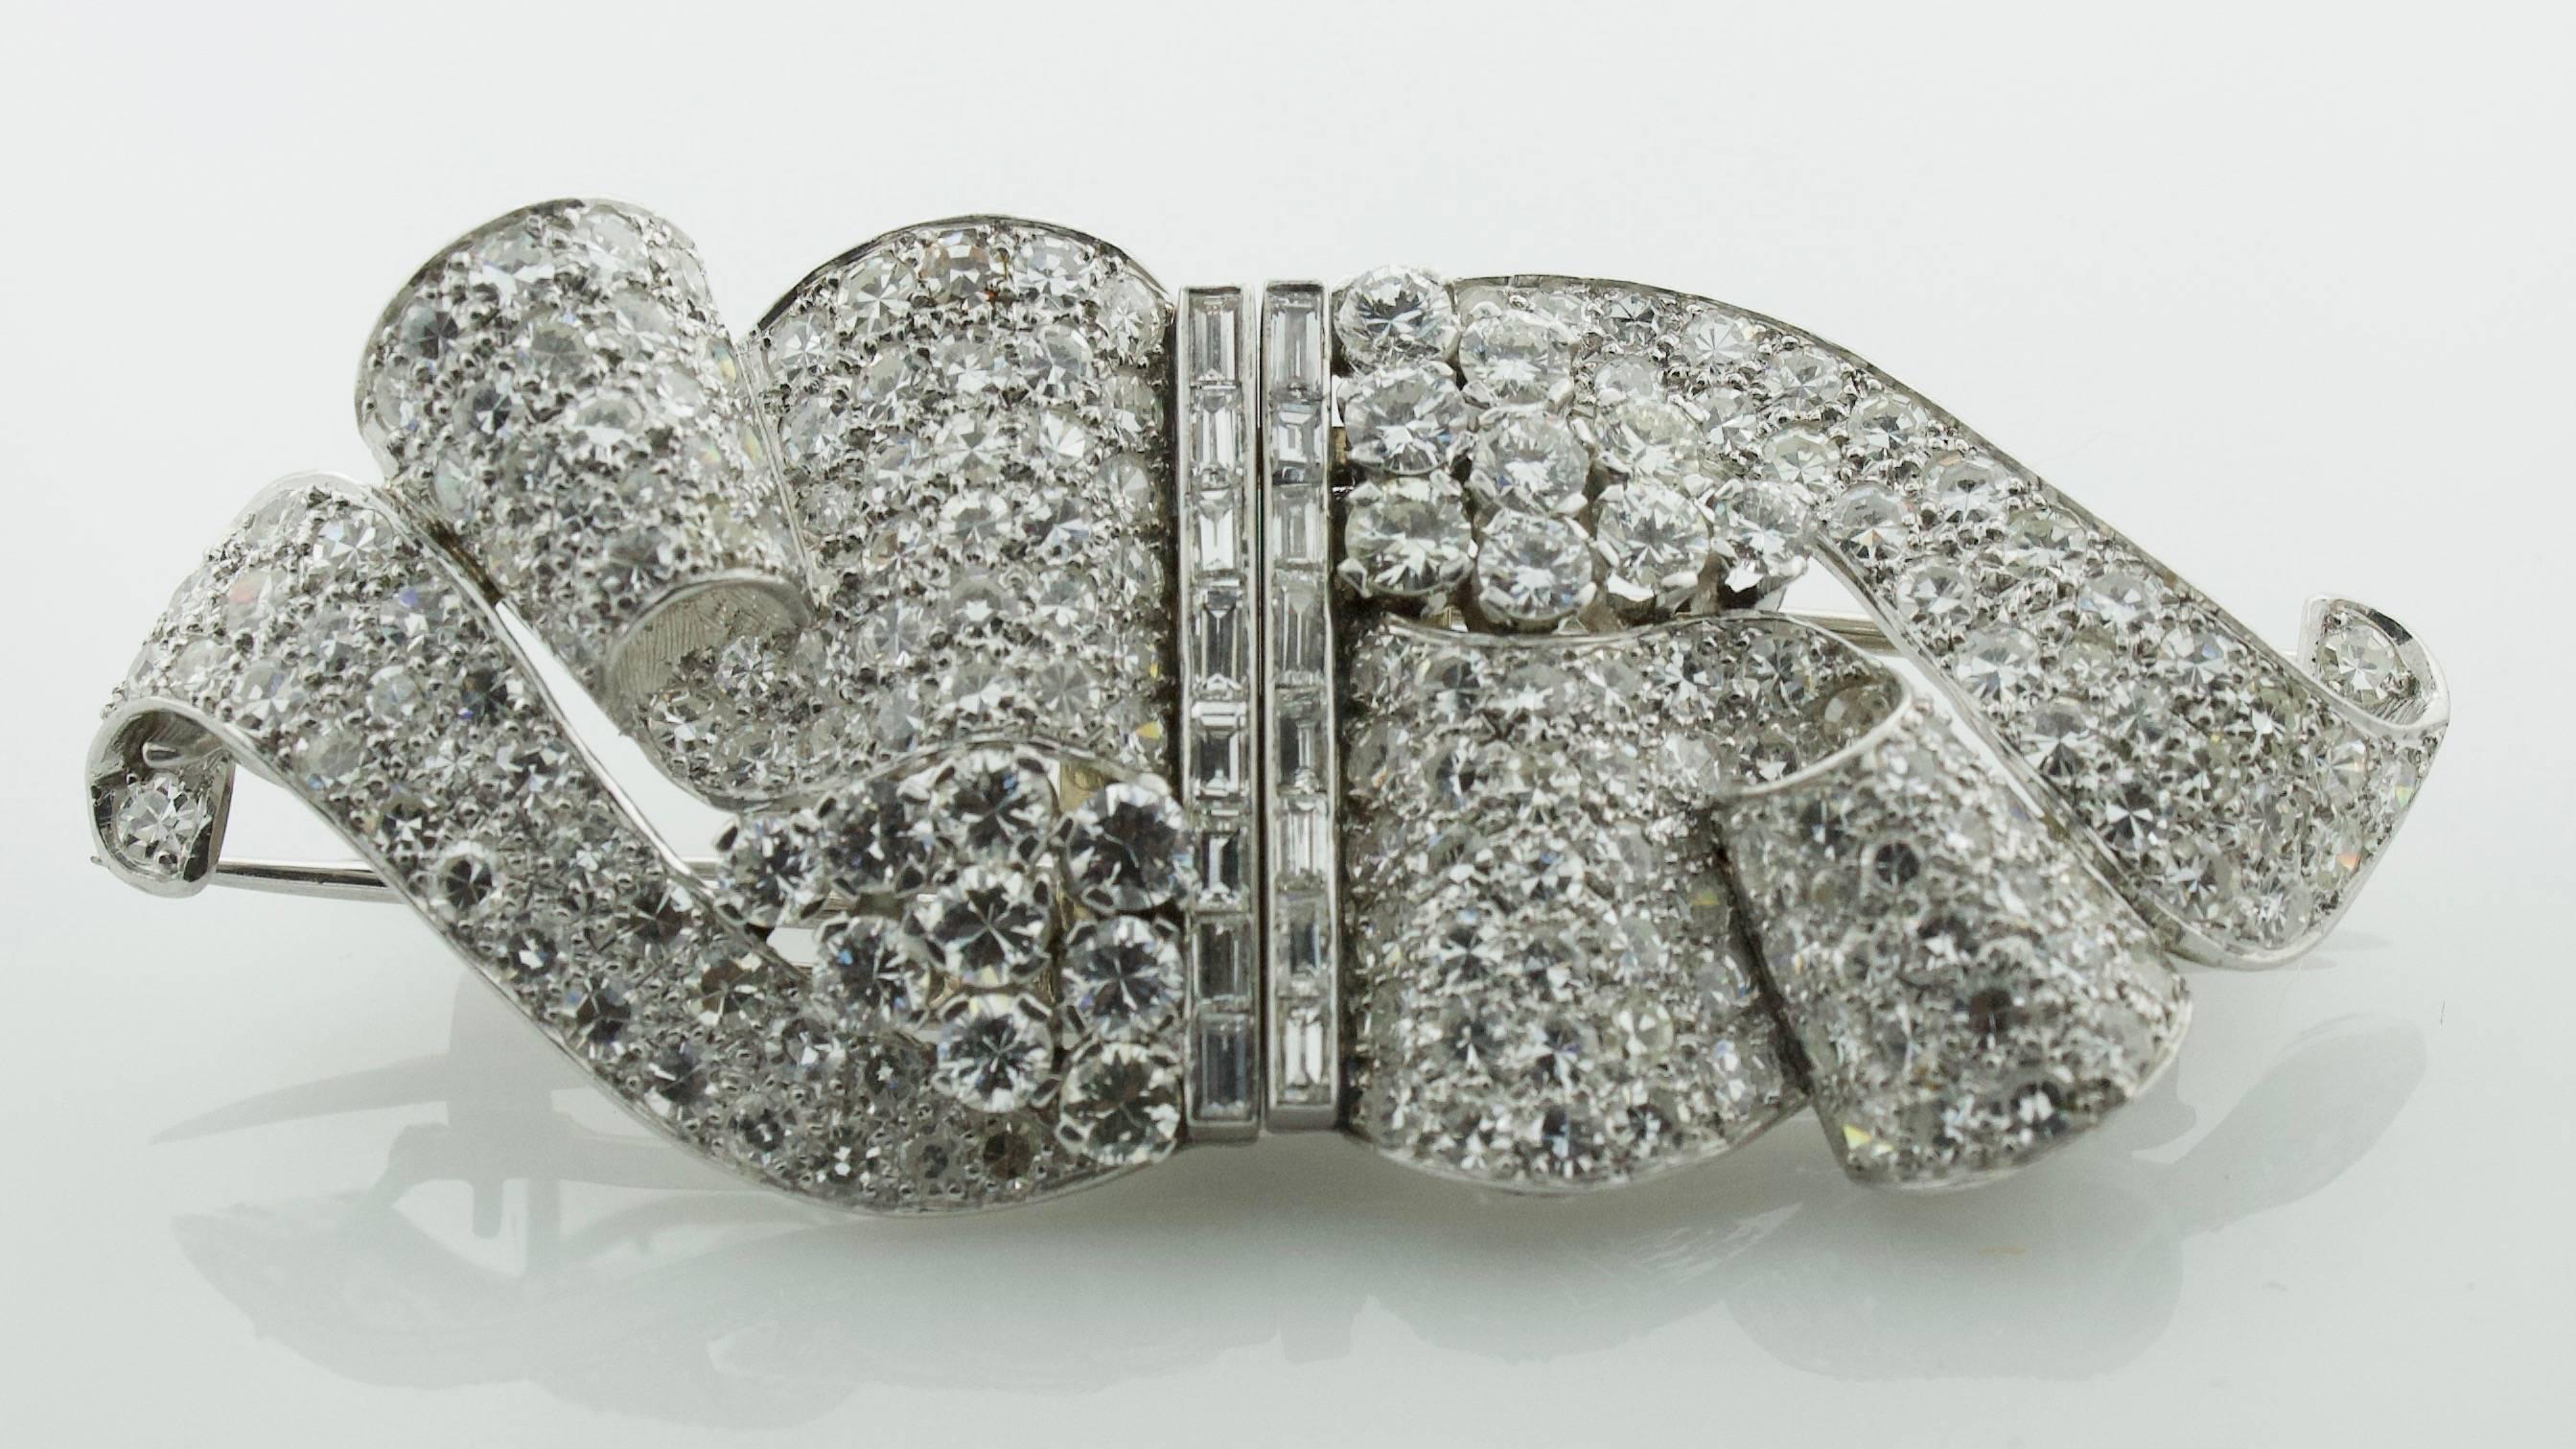 Art Deco Diamond Brooch-Clips Circa 1930's
With Over 10 carats of Diamonds
Infinite  Ways To Wear These Diamond Brooch Clips 
Besides The Great Depression The 1930's Produced Magnificent Jewels That The Well Healed Loved To Parade.  No it's Your